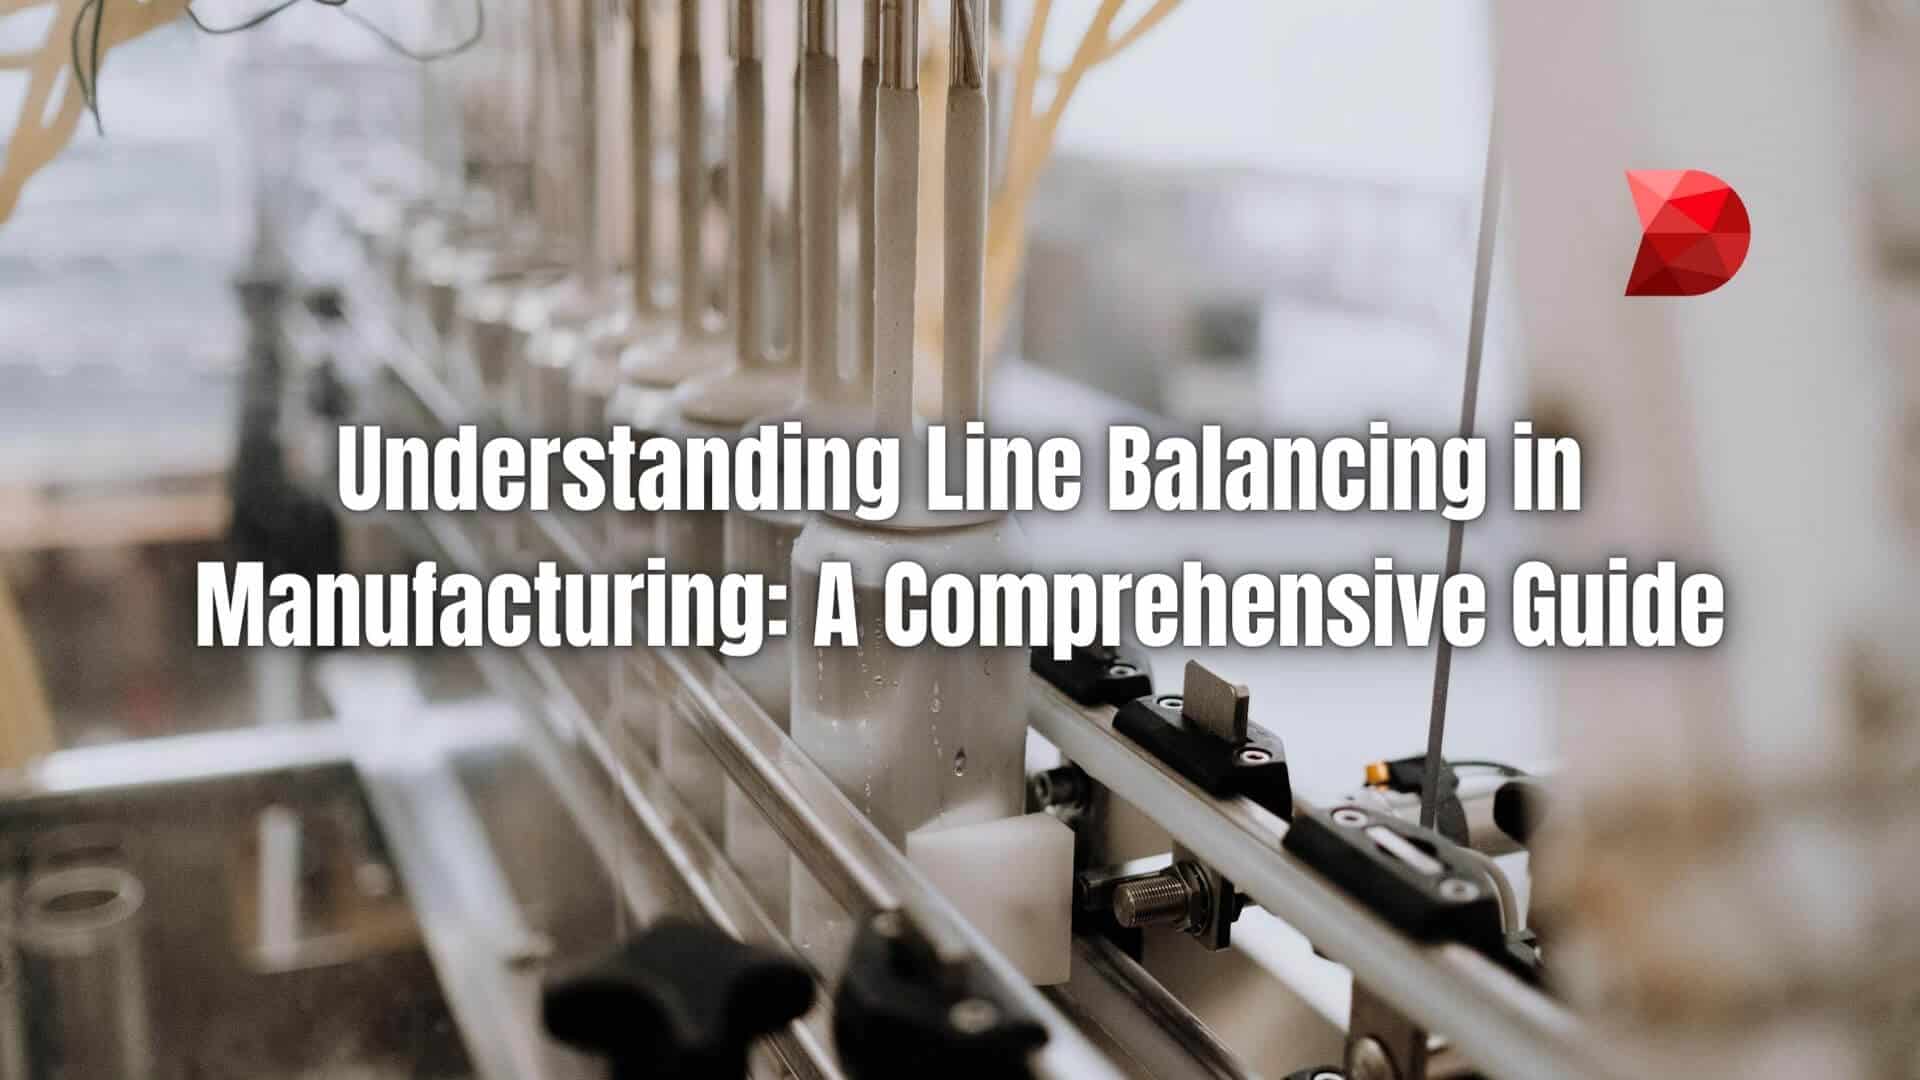 Unlock efficiency with our guide to line balancing in manufacturing. Learn techniques to optimize production workflows and maximize output.